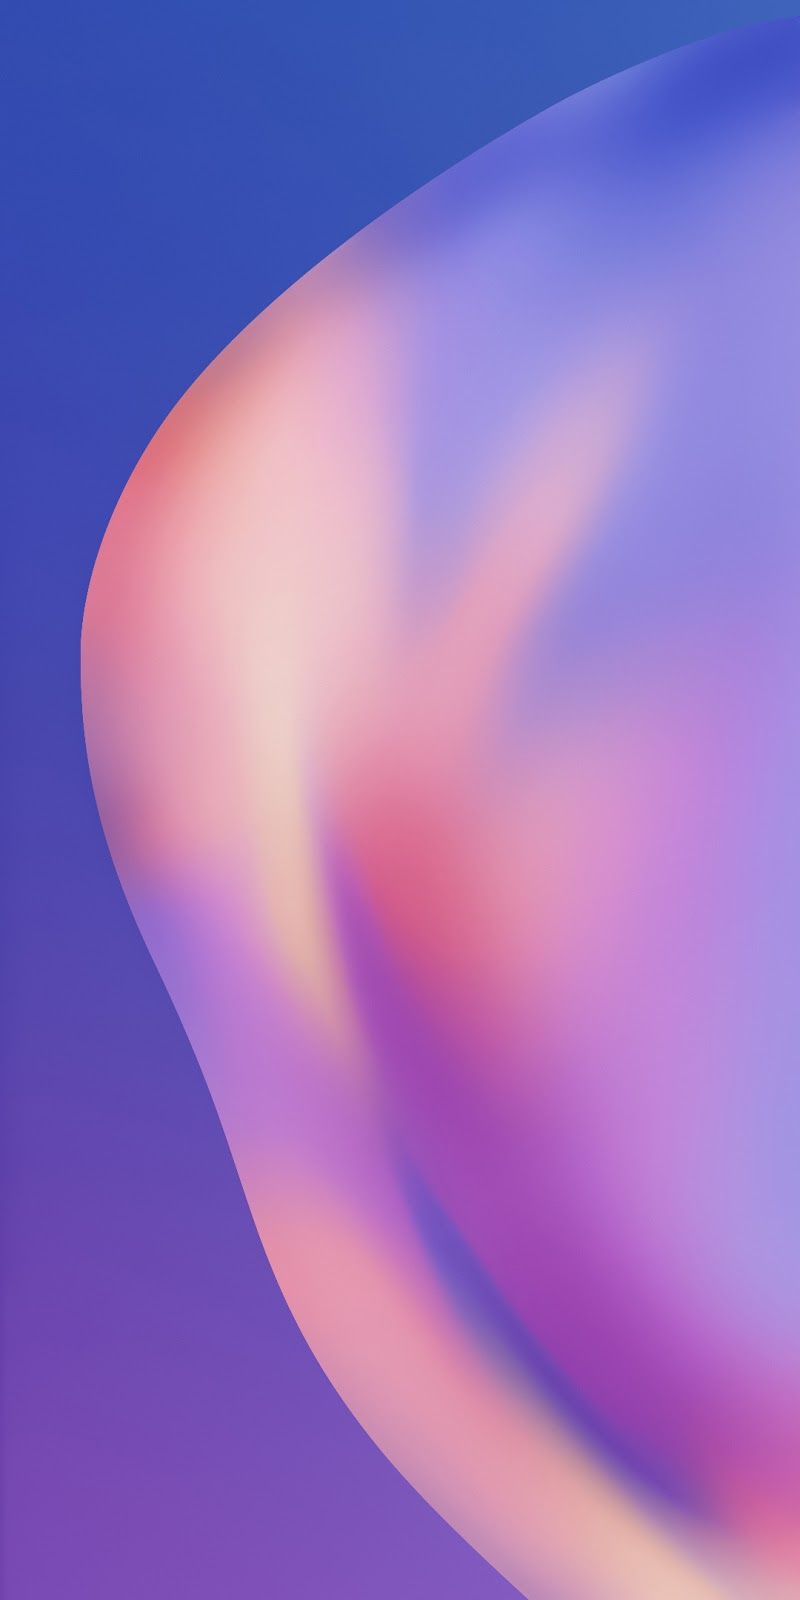 Mi 8 Youth Stock Wallpaper. Xiaomi wallpaper, Abstract iphone